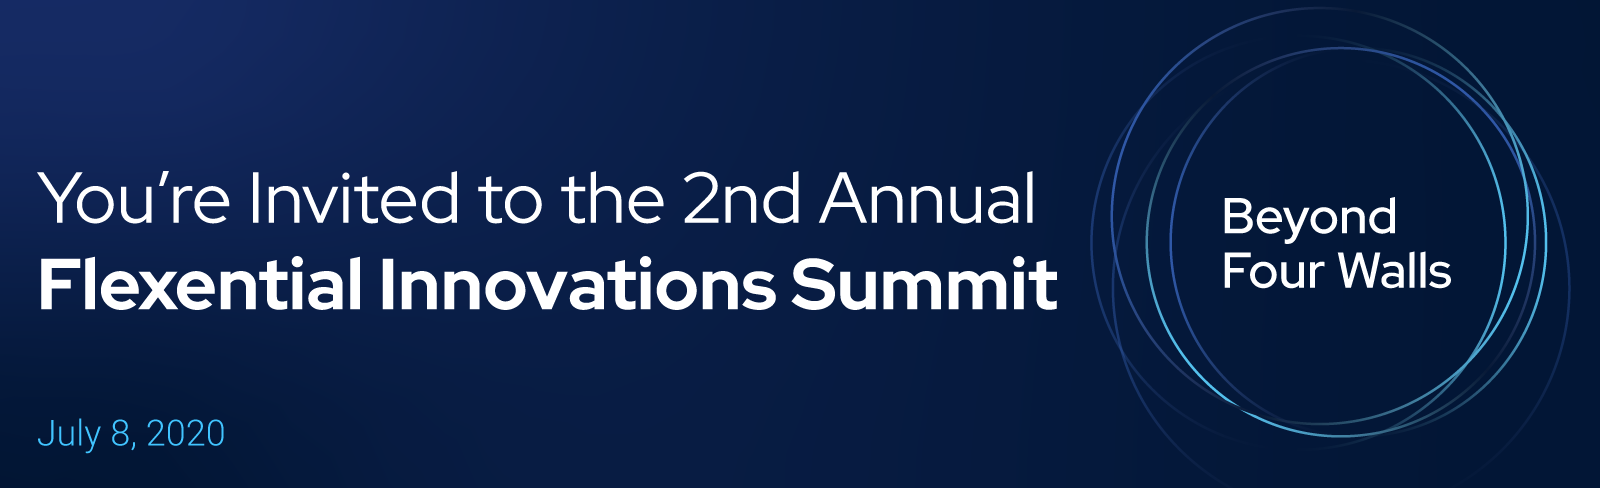 Innovation-Summit-Landing-Page-Banner_001.png